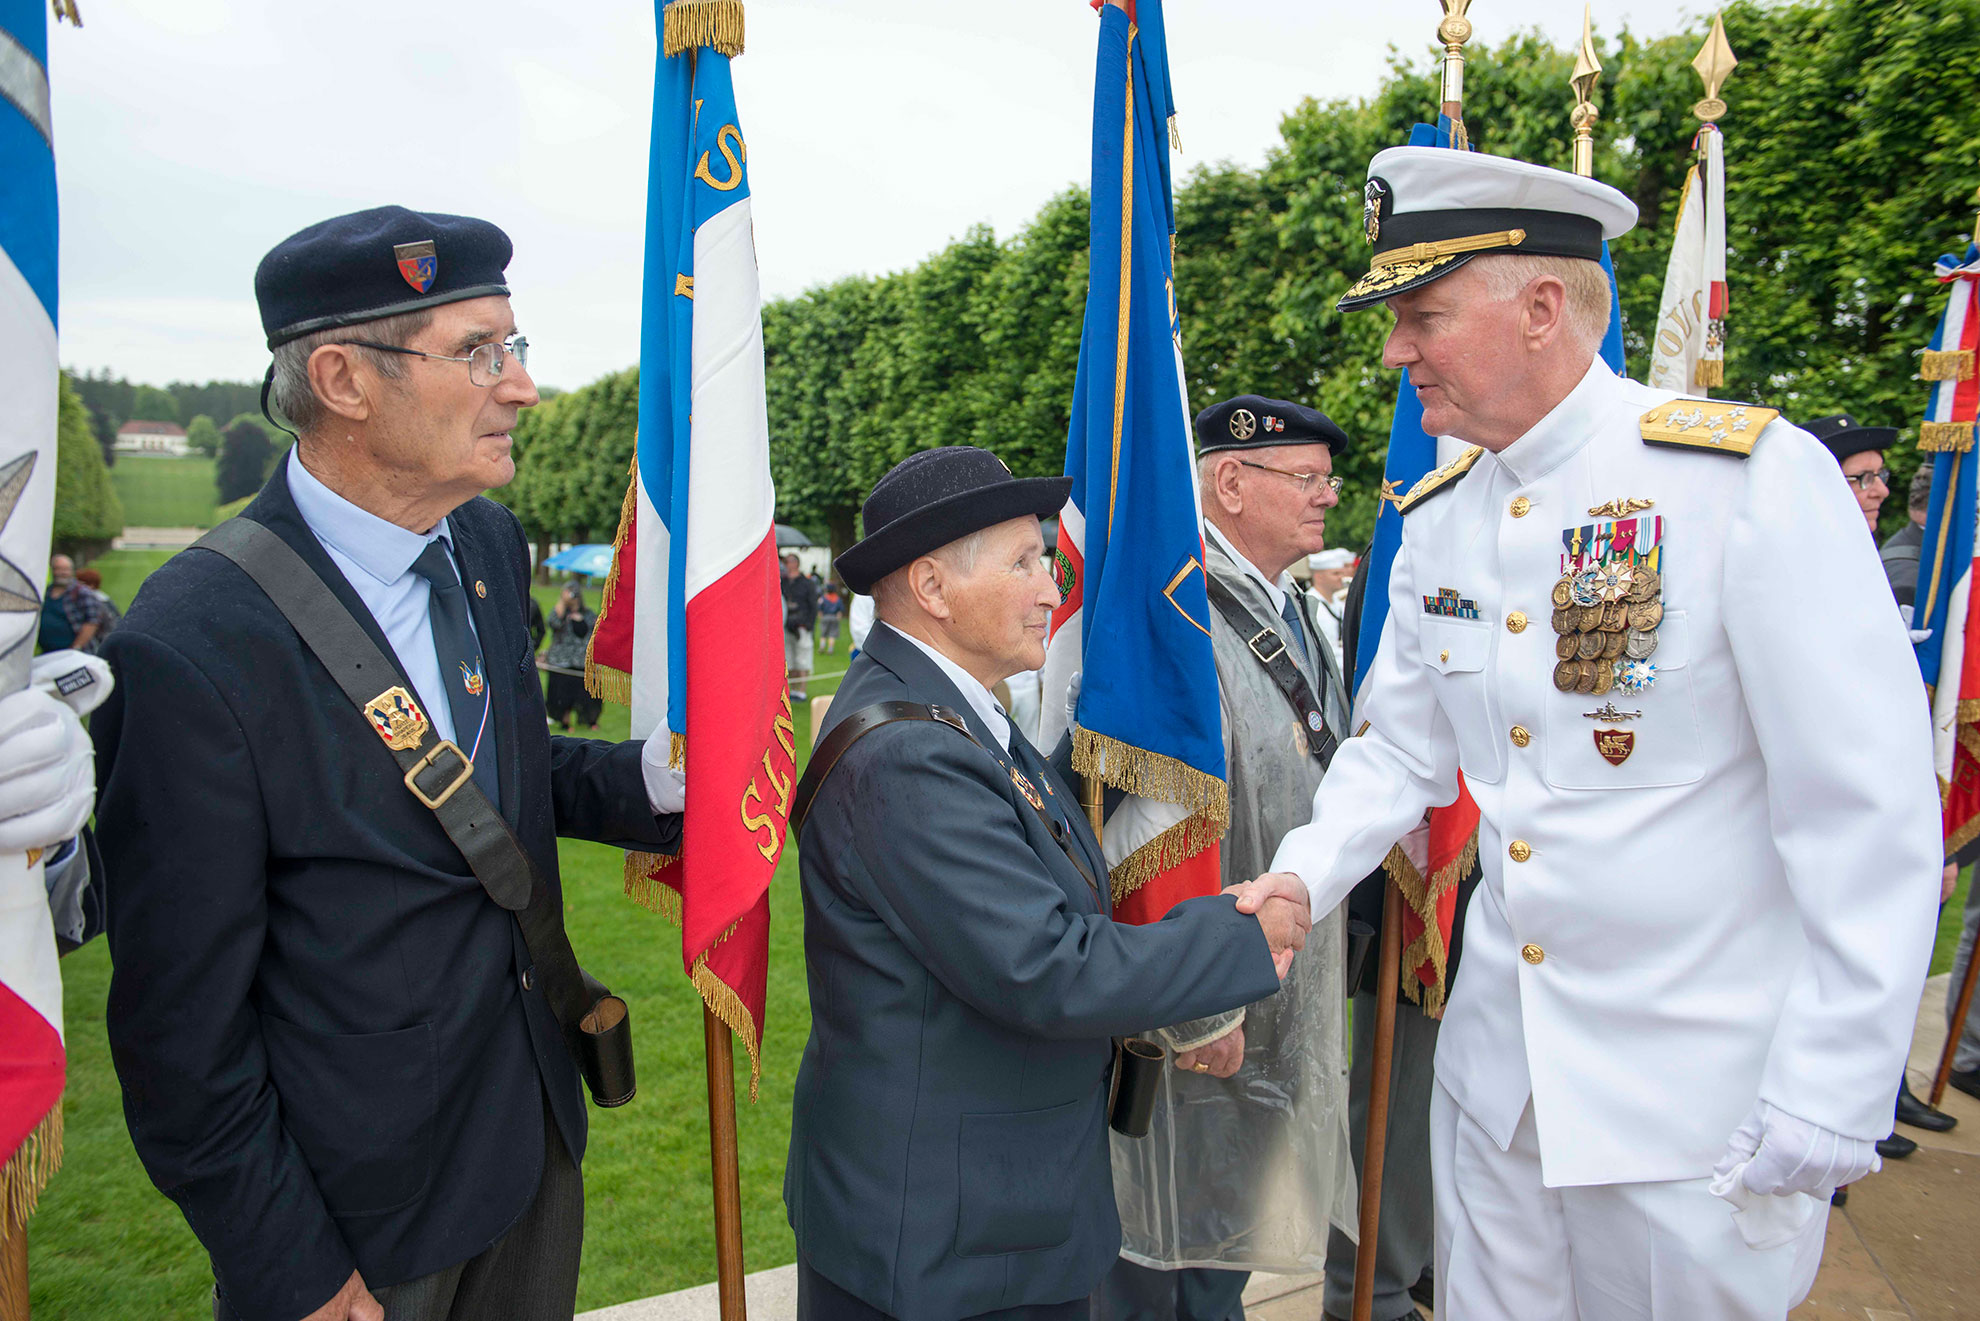 Meuse-Argonne, France (May 27, 2018) Adm. James G. Foggo III, commander of U.S. Naval Forces Europe-Africa, thanks veterans for their service following a wreath laying during a Memorial Day and World War I centennial commemoration ceremony at Meuse-Argonne American Cemetery in France. Admirals from U.S. Naval Forces Europe-Africa and U.S. 6th Fleet traveled throughout Europe visiting American cemeteries and monuments to honor the lives and legacies of fallen U.S. and allied service members that paid the ultimate sacrifice in the service of their countries -- U.S. Navy photo by MCS1 Ryan Riley. -